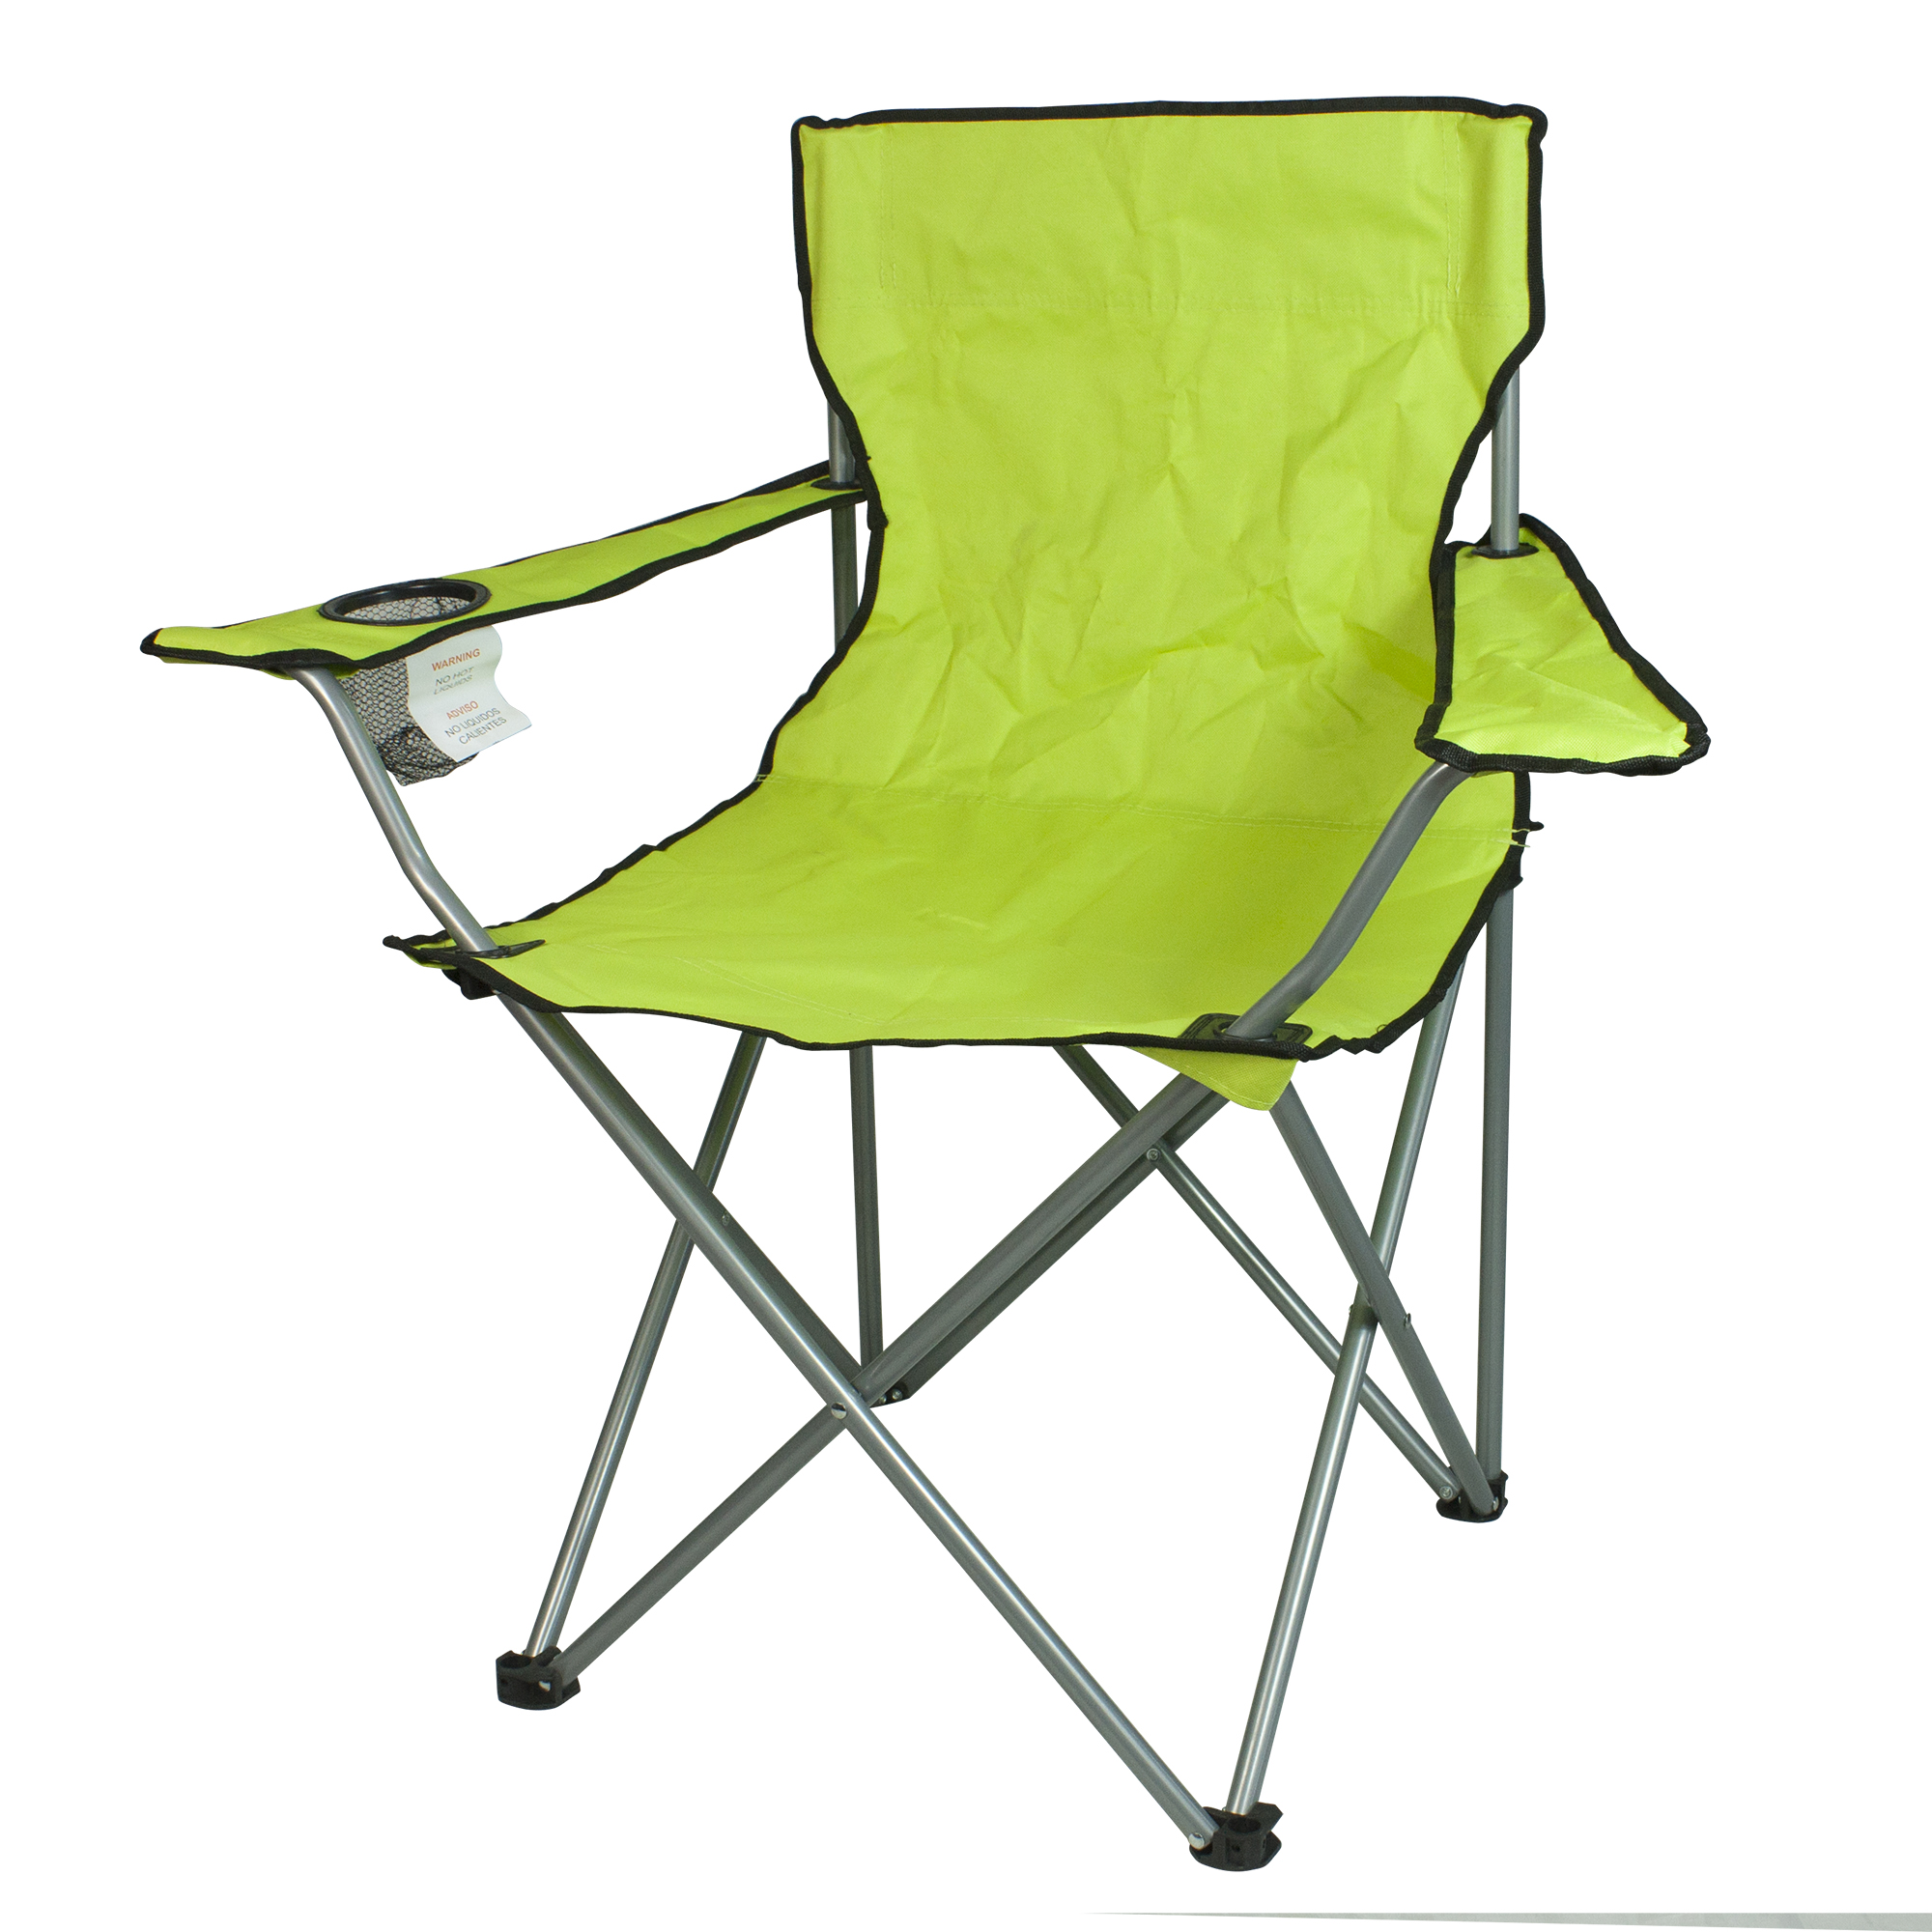 Northwest Territory Lightweight Sports Chair - Bright Lime